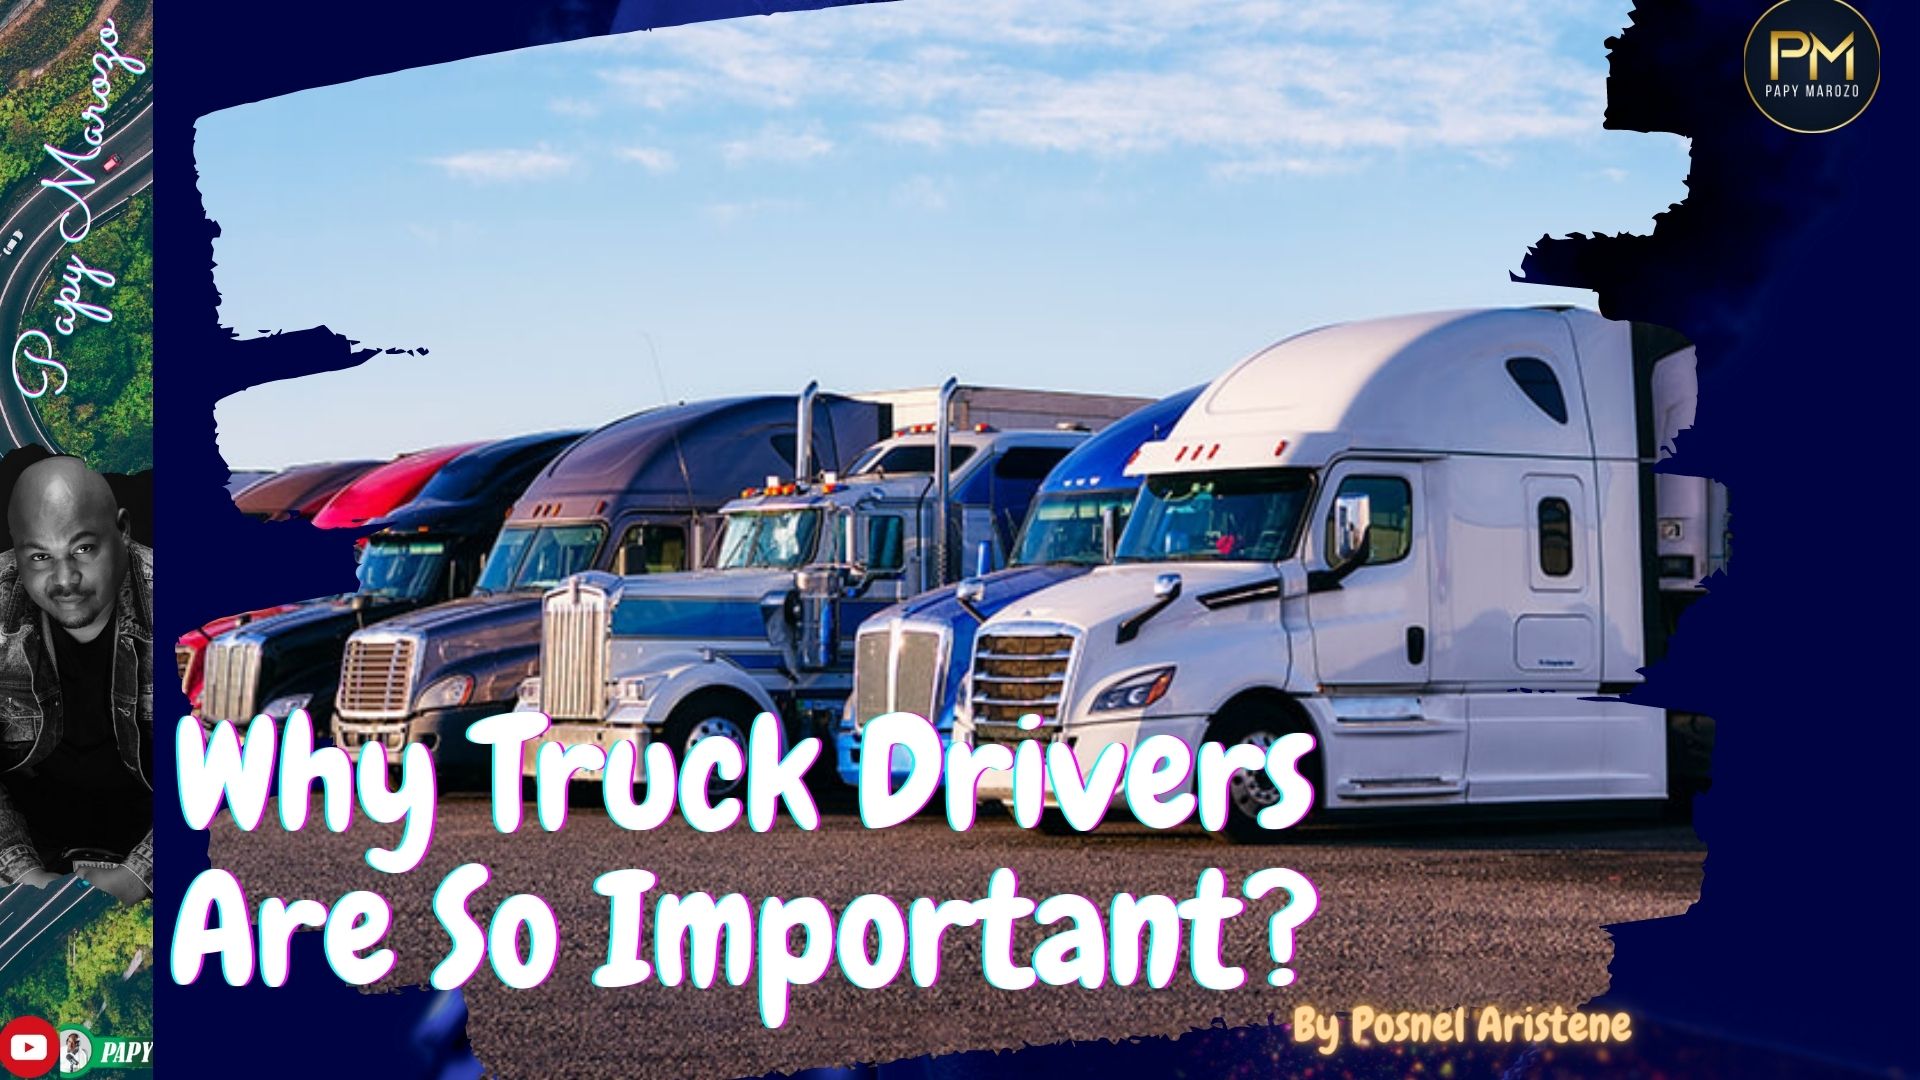 Posnel Aristene: Why Truck Drivers Are So Important?